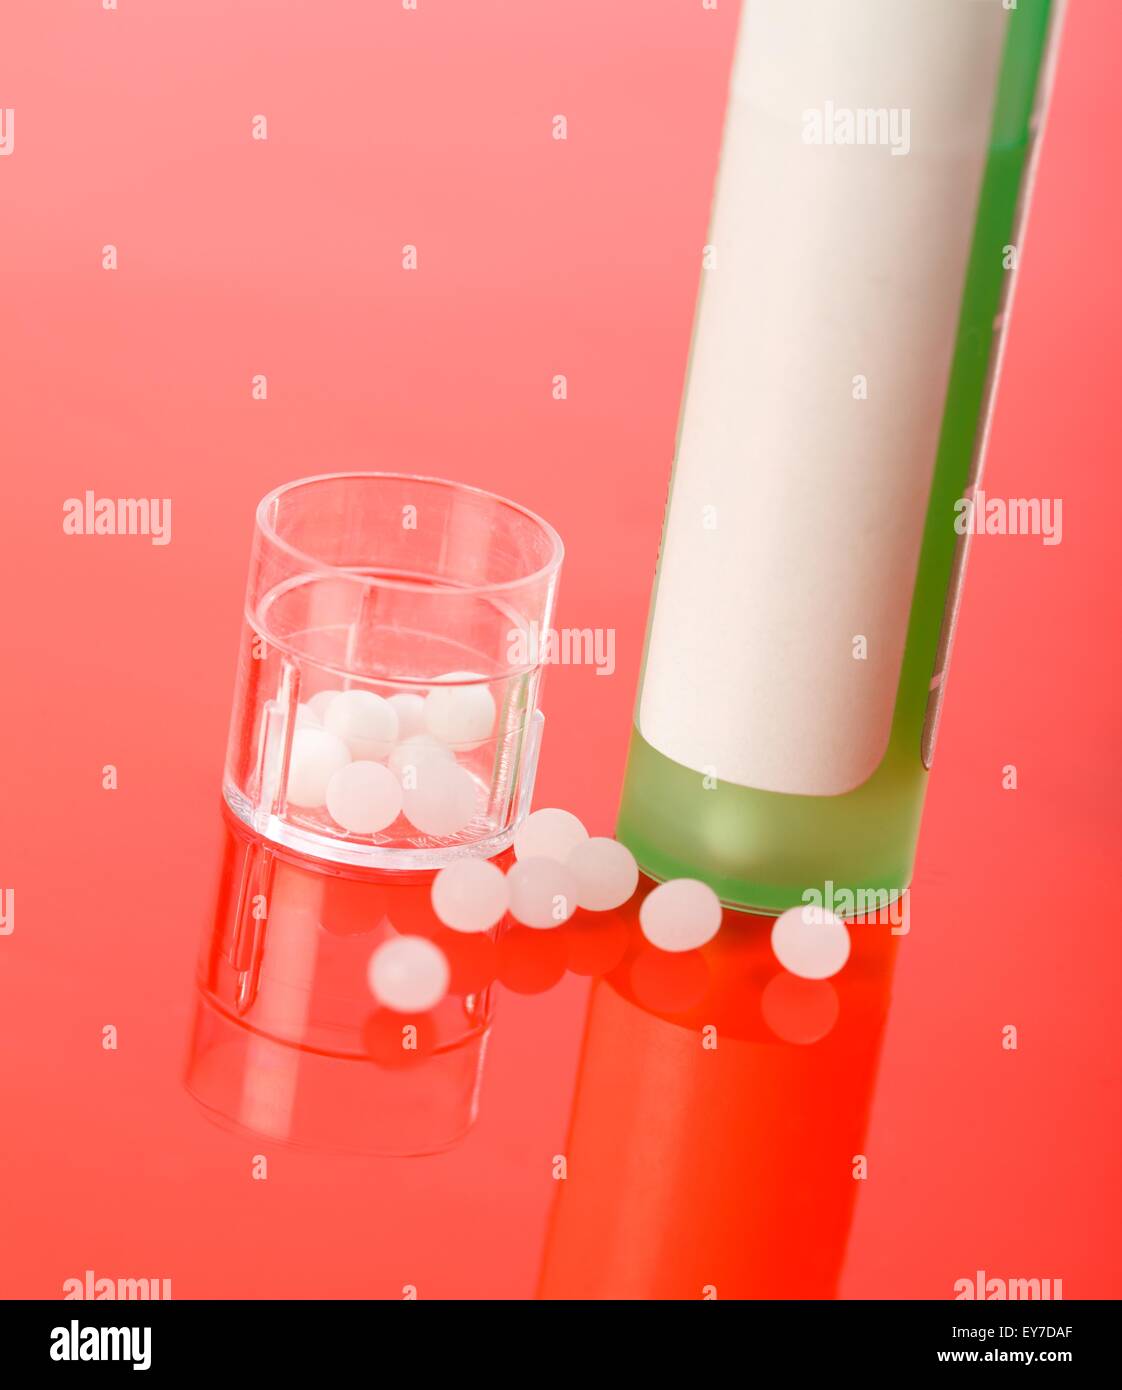 Homeopathic pills and container on reflective red background Stock Photo